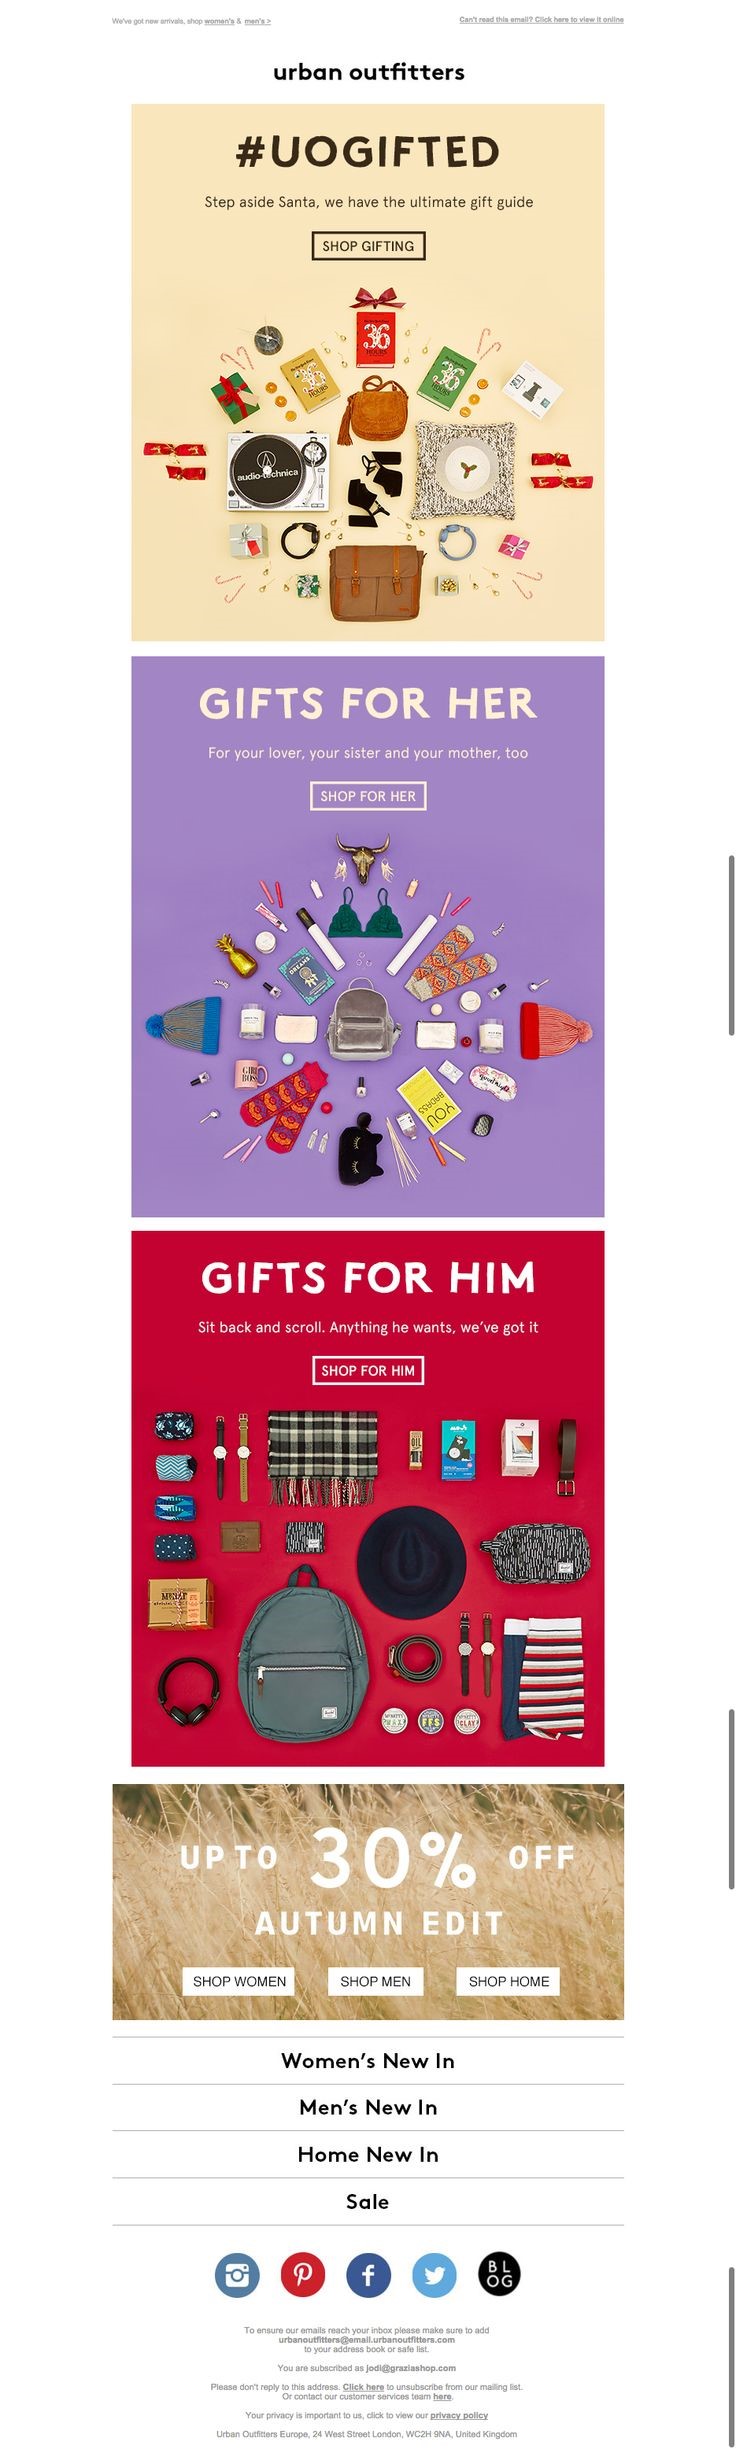 Gifts for holiday